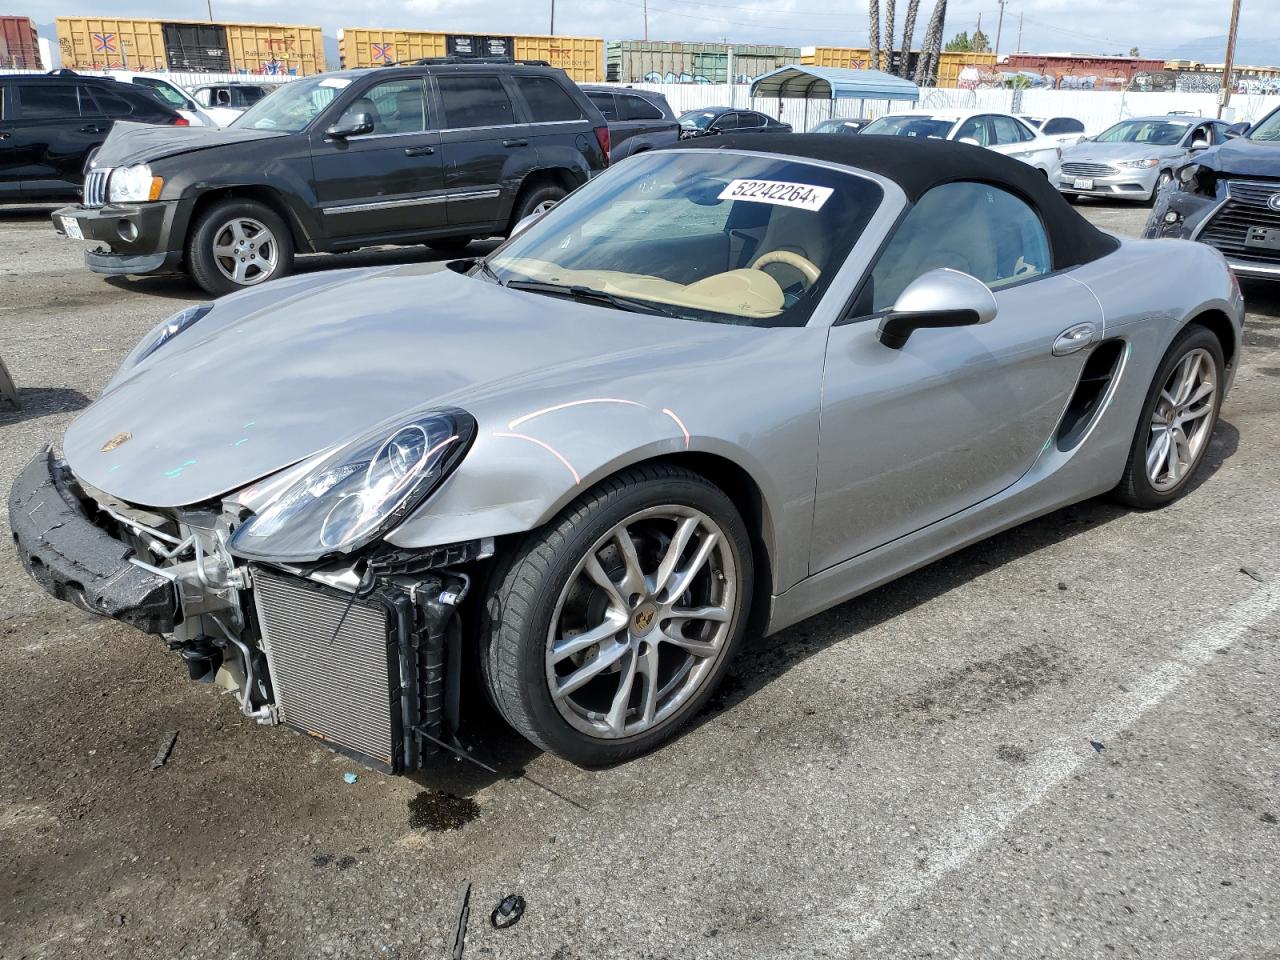 vin: WP0CA2A86DS113942 WP0CA2A86DS113942 2013 porsche boxster 2700 for Sale in 91405 1509, Ca - Van Nuys, Van Nuys, California, USA